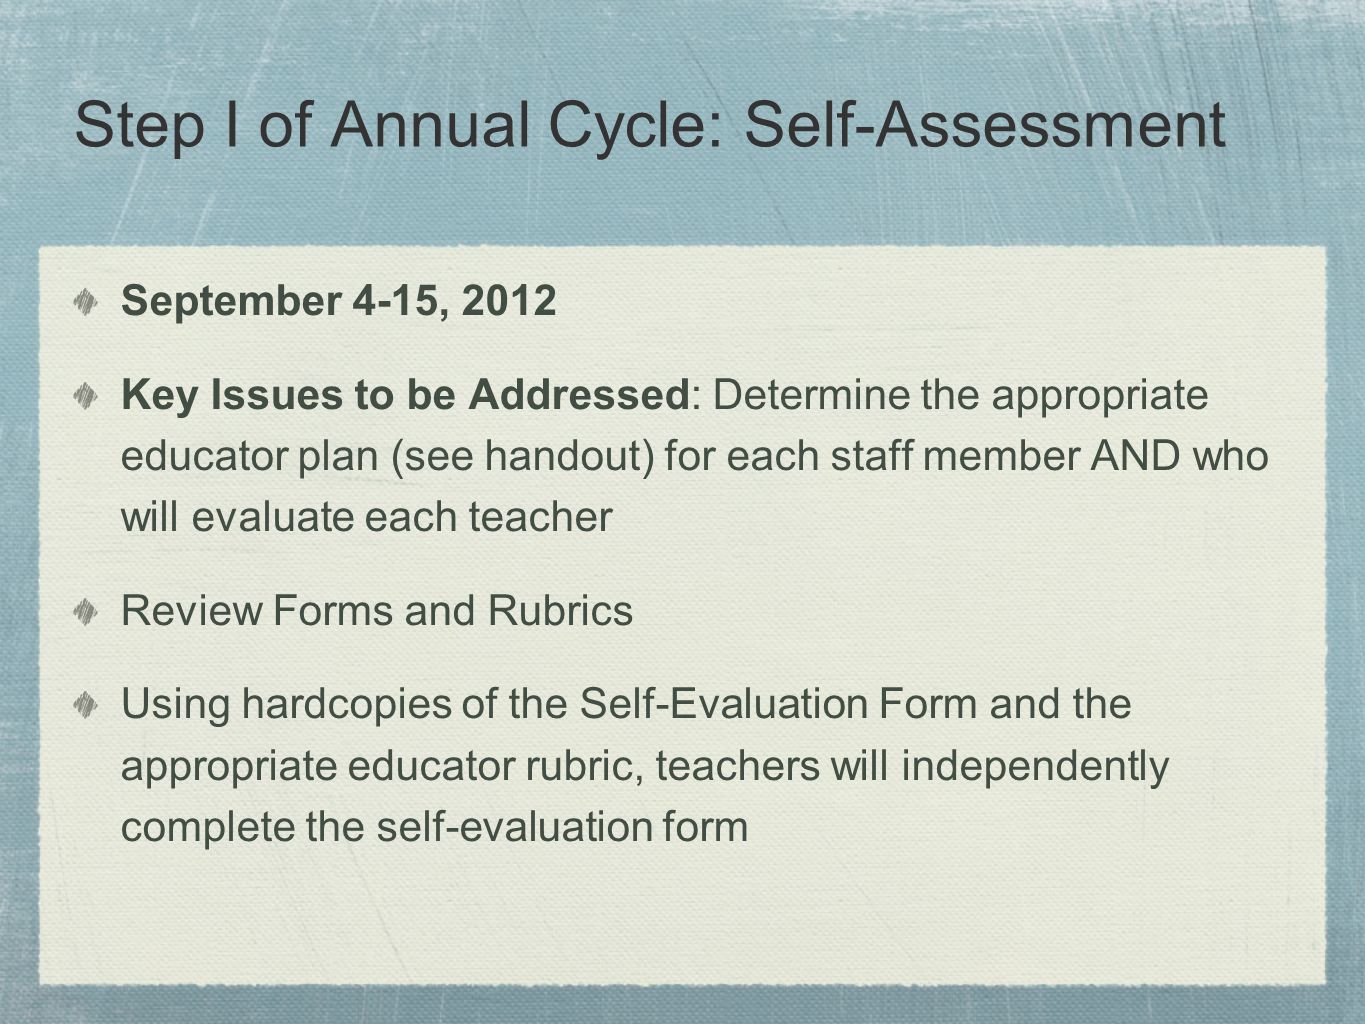 Step I of Annual Cycle: Self-Assessment September 4-15, 2012 Key Issues to be Addressed: Determine the appropriate educator plan (see handout) for each staff member AND who will evaluate each teacher Review Forms and Rubrics Using hardcopies of the Self-Evaluation Form and the appropriate educator rubric, teachers will independently complete the self-evaluation form